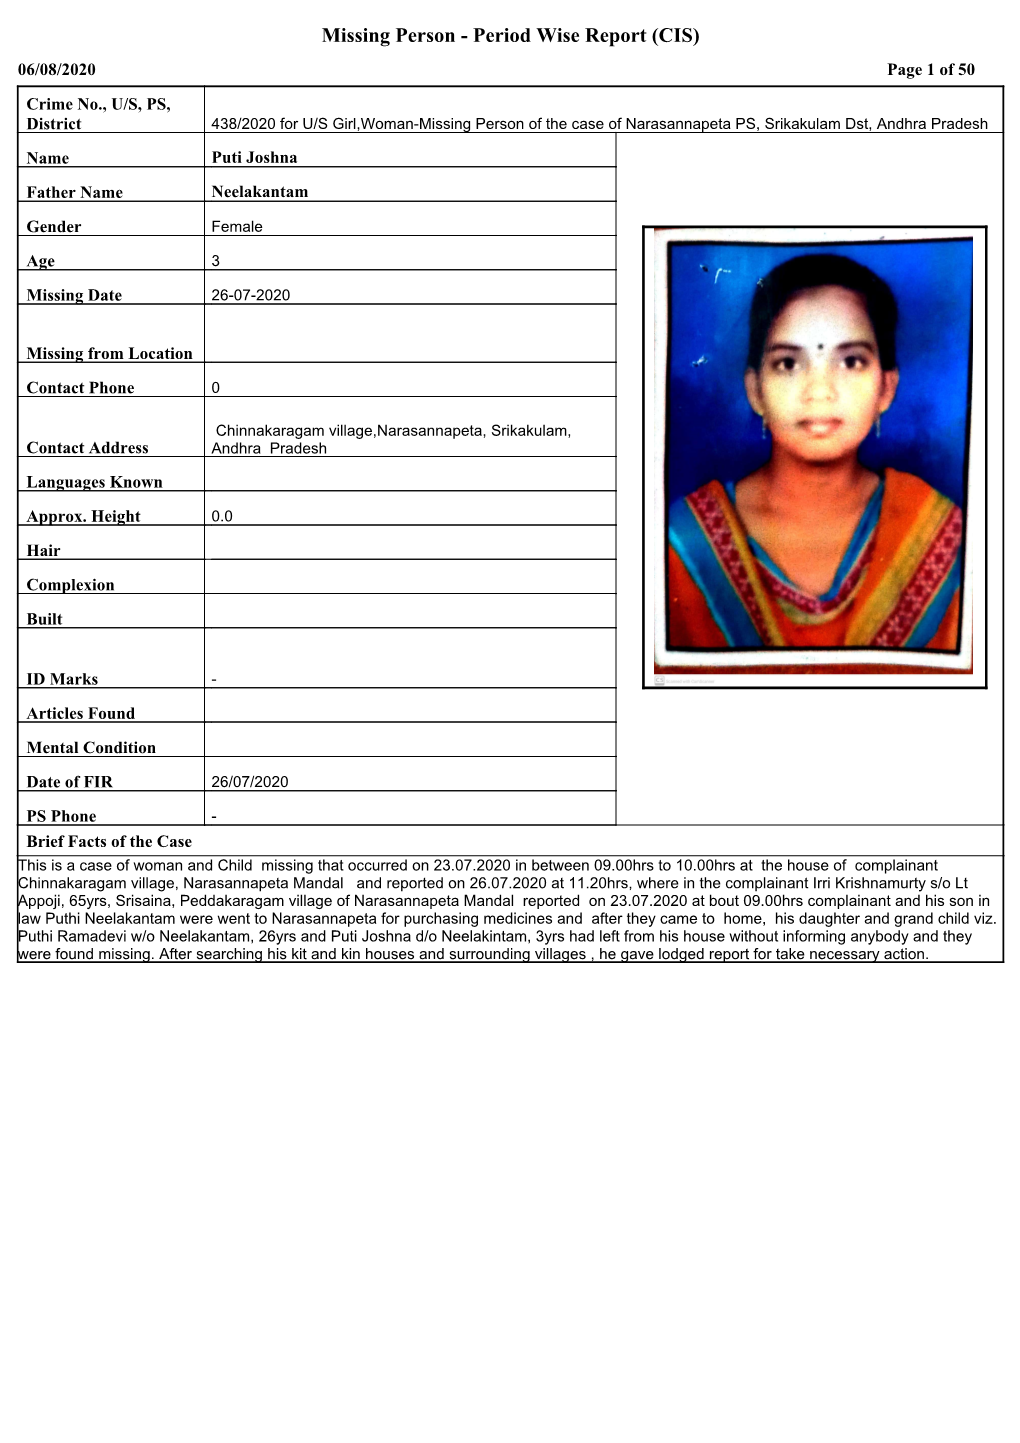 Missing Person - Period Wise Report (CIS) 06/08/2020 Page 1 of 50